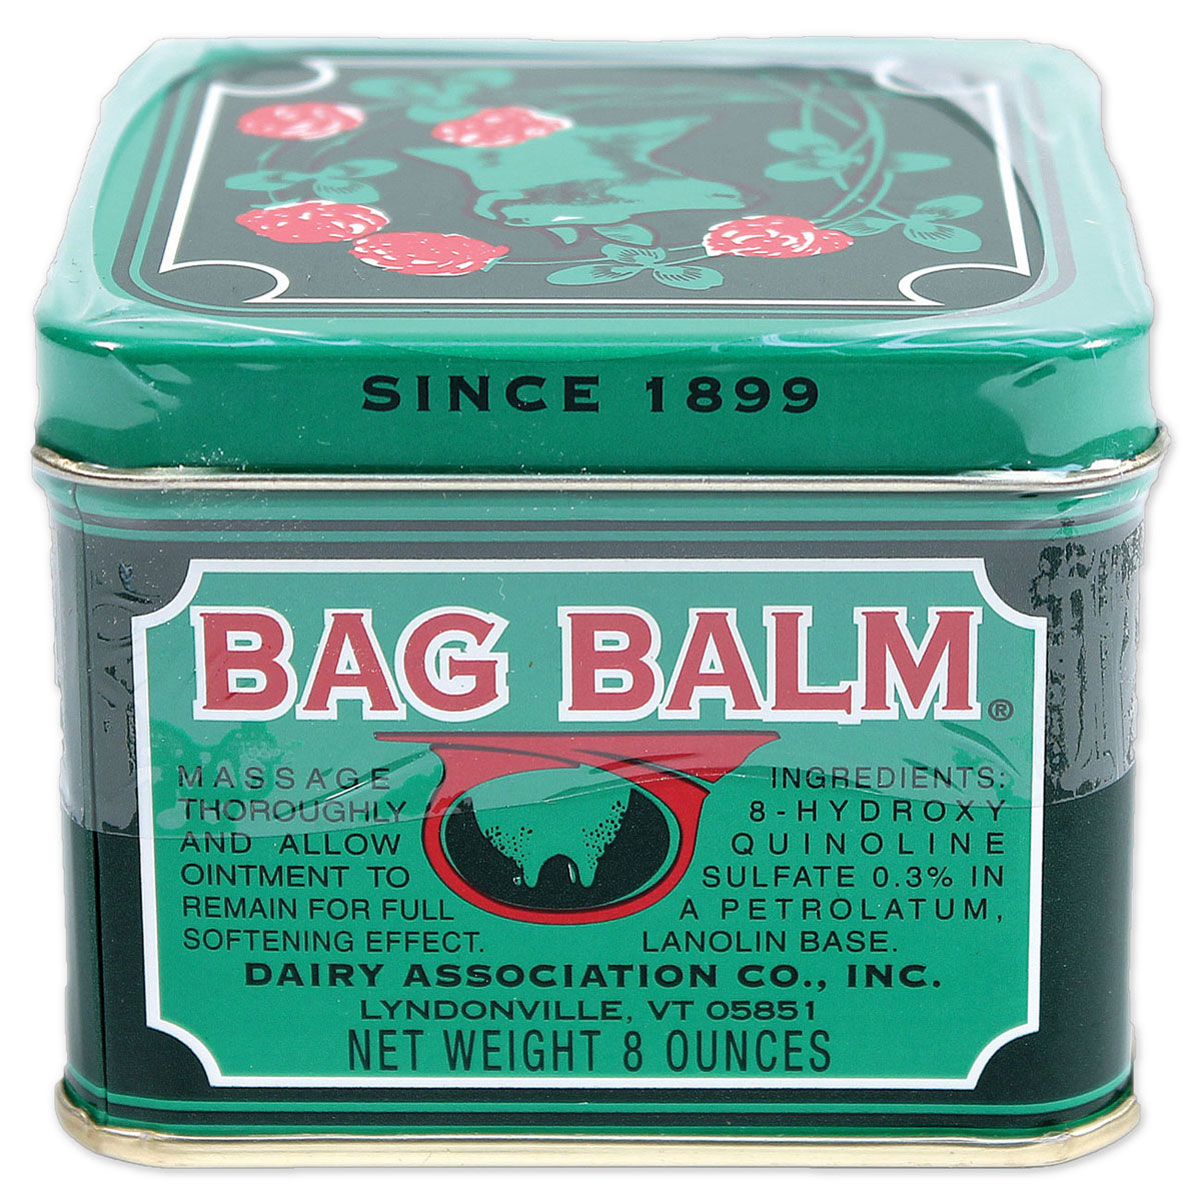 Buy Bag Balm Ointment , 1 Oz - Pack of 4 Online at Low Prices in India -  Amazon.in